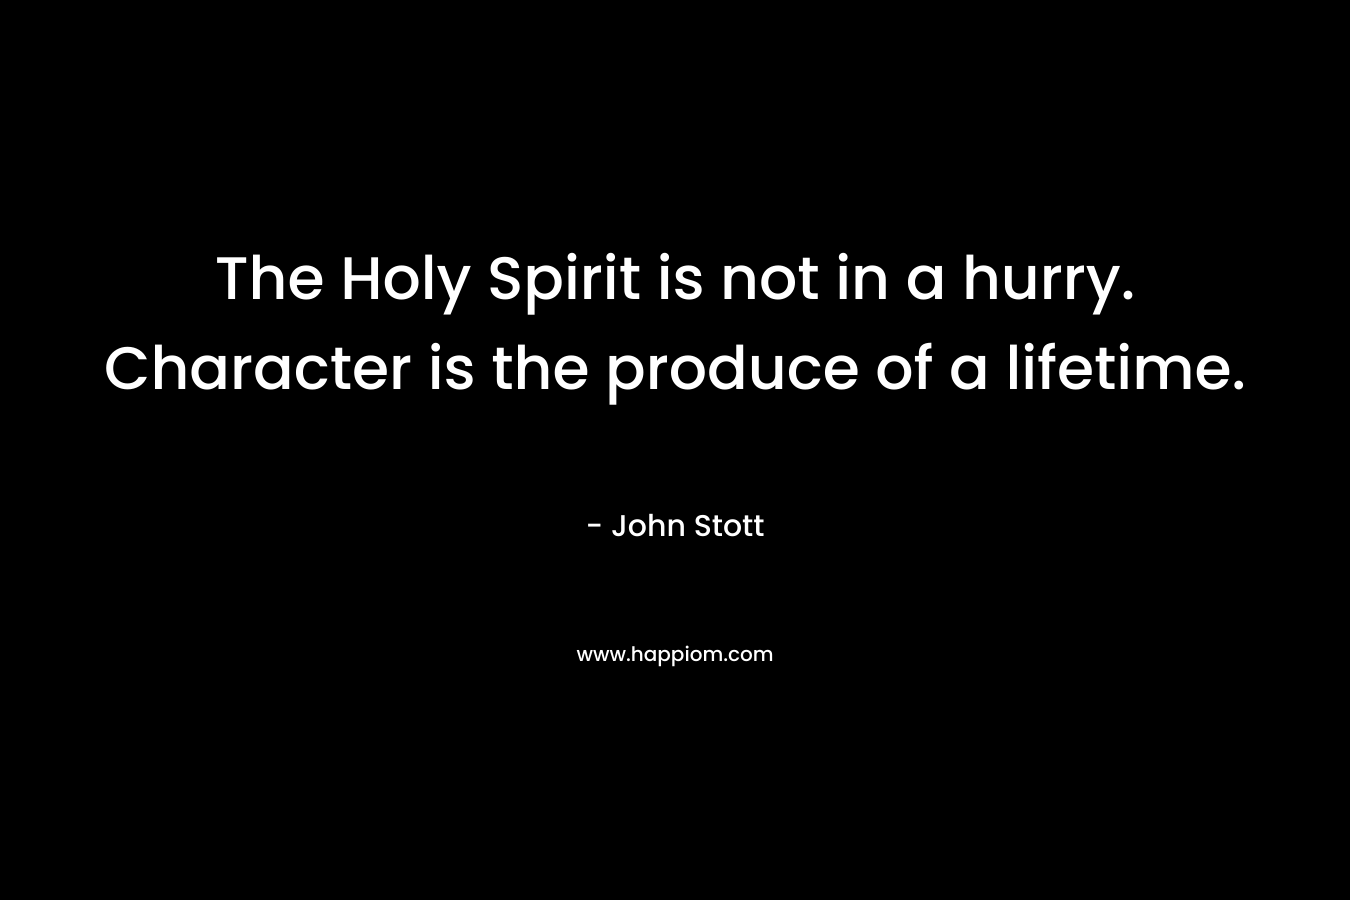 The Holy Spirit is not in a hurry. Character is the produce of a lifetime. – John Stott